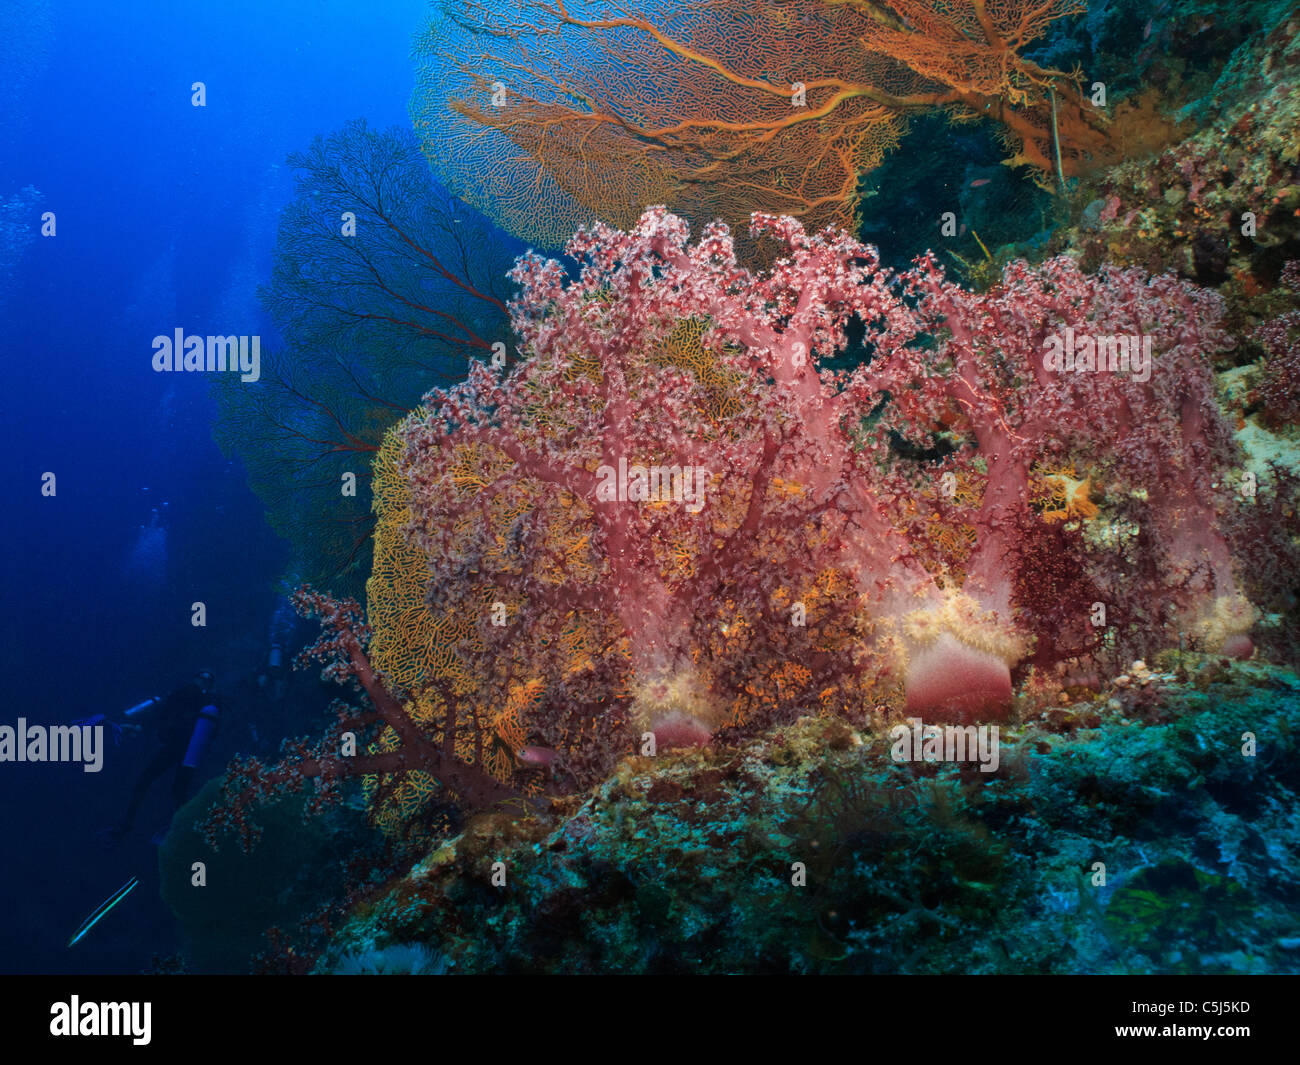 Dense soft corals and sea fans can be found underwater of Tubbataha Stock Photo